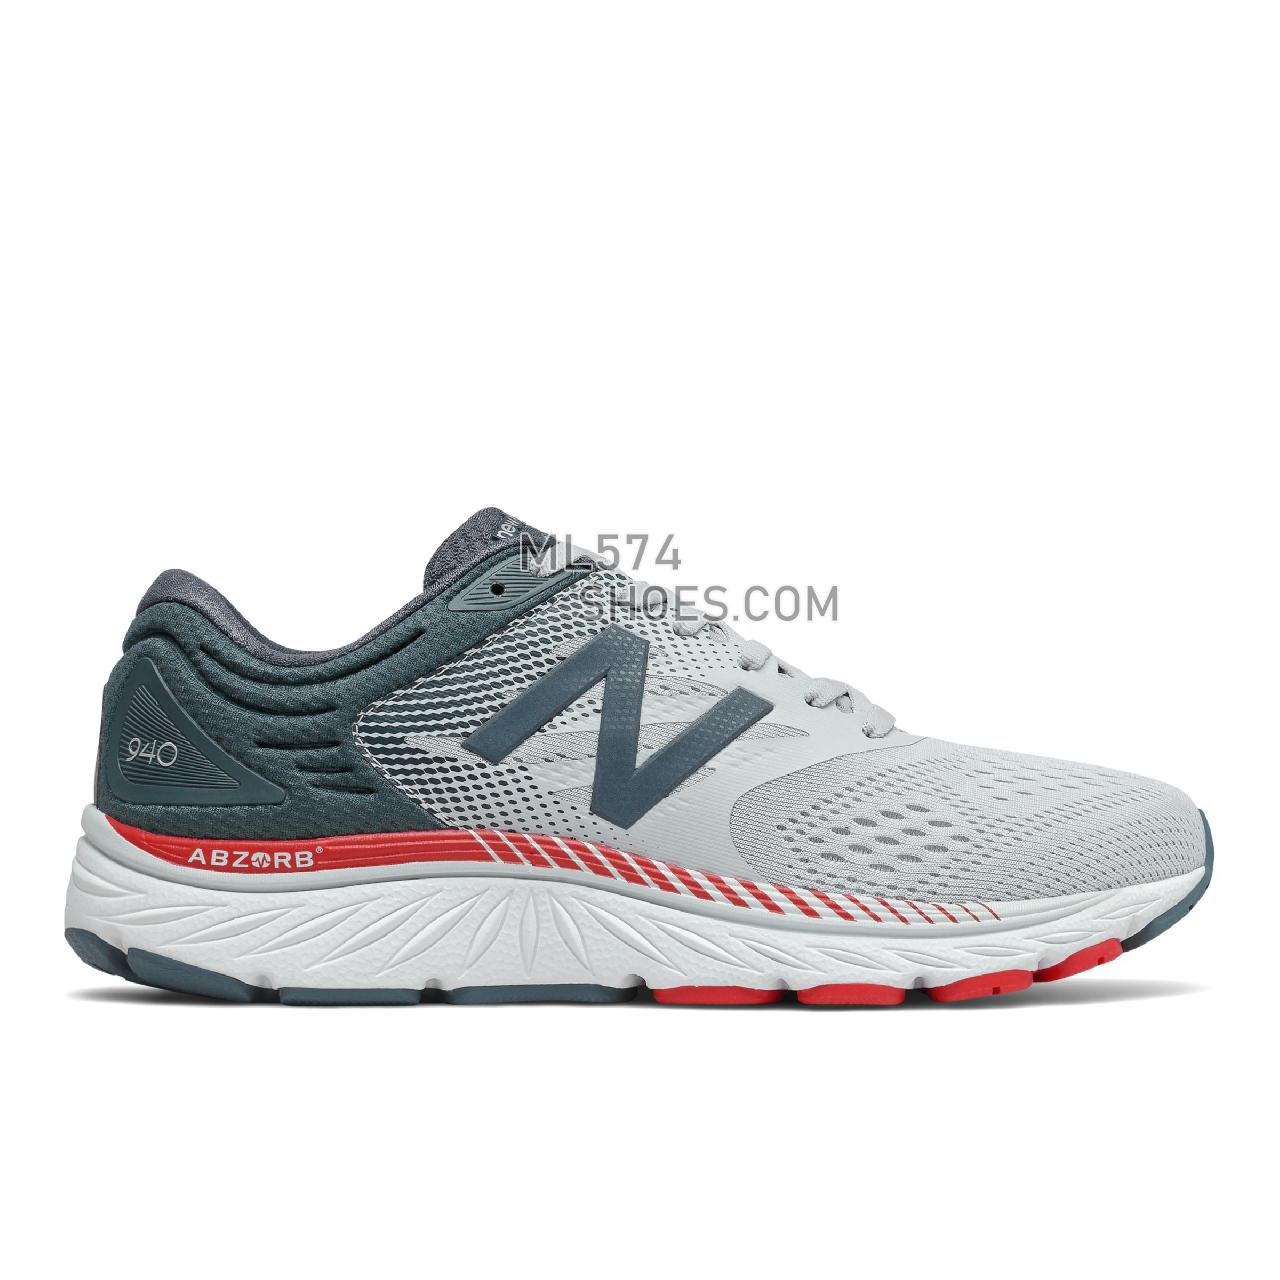 New Balance 940v4 - Men's Neutral Running - Light Aluminum with Team Red and Petrol - M940CG4